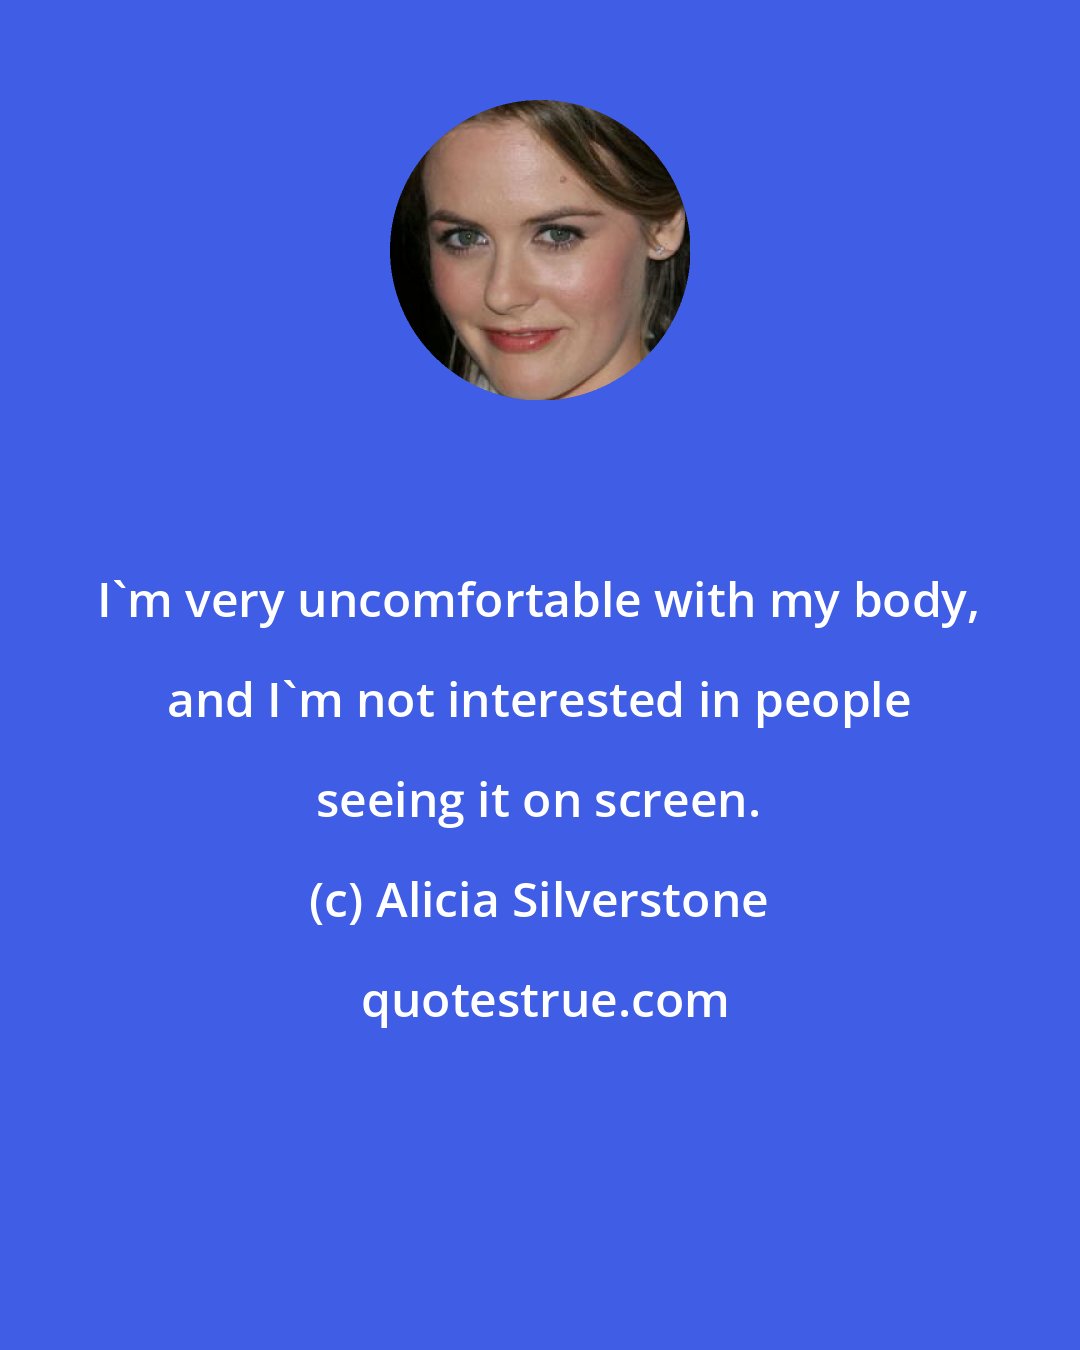 Alicia Silverstone: I'm very uncomfortable with my body, and I'm not interested in people seeing it on screen.